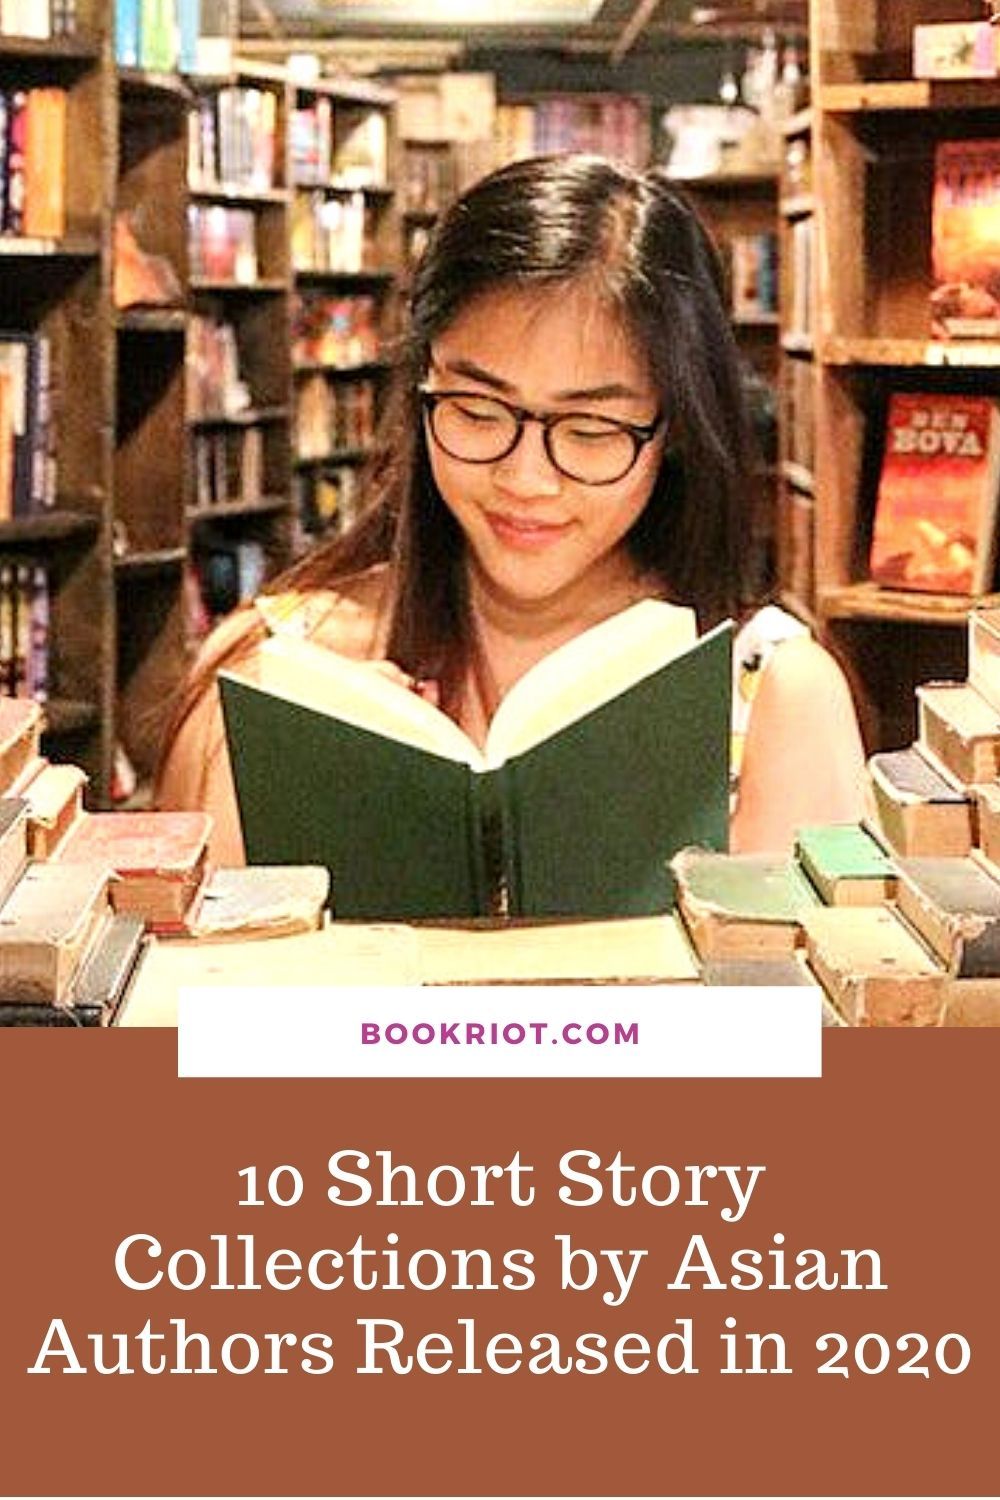 10 Short Story Collections by Asian Authors Released in 2020